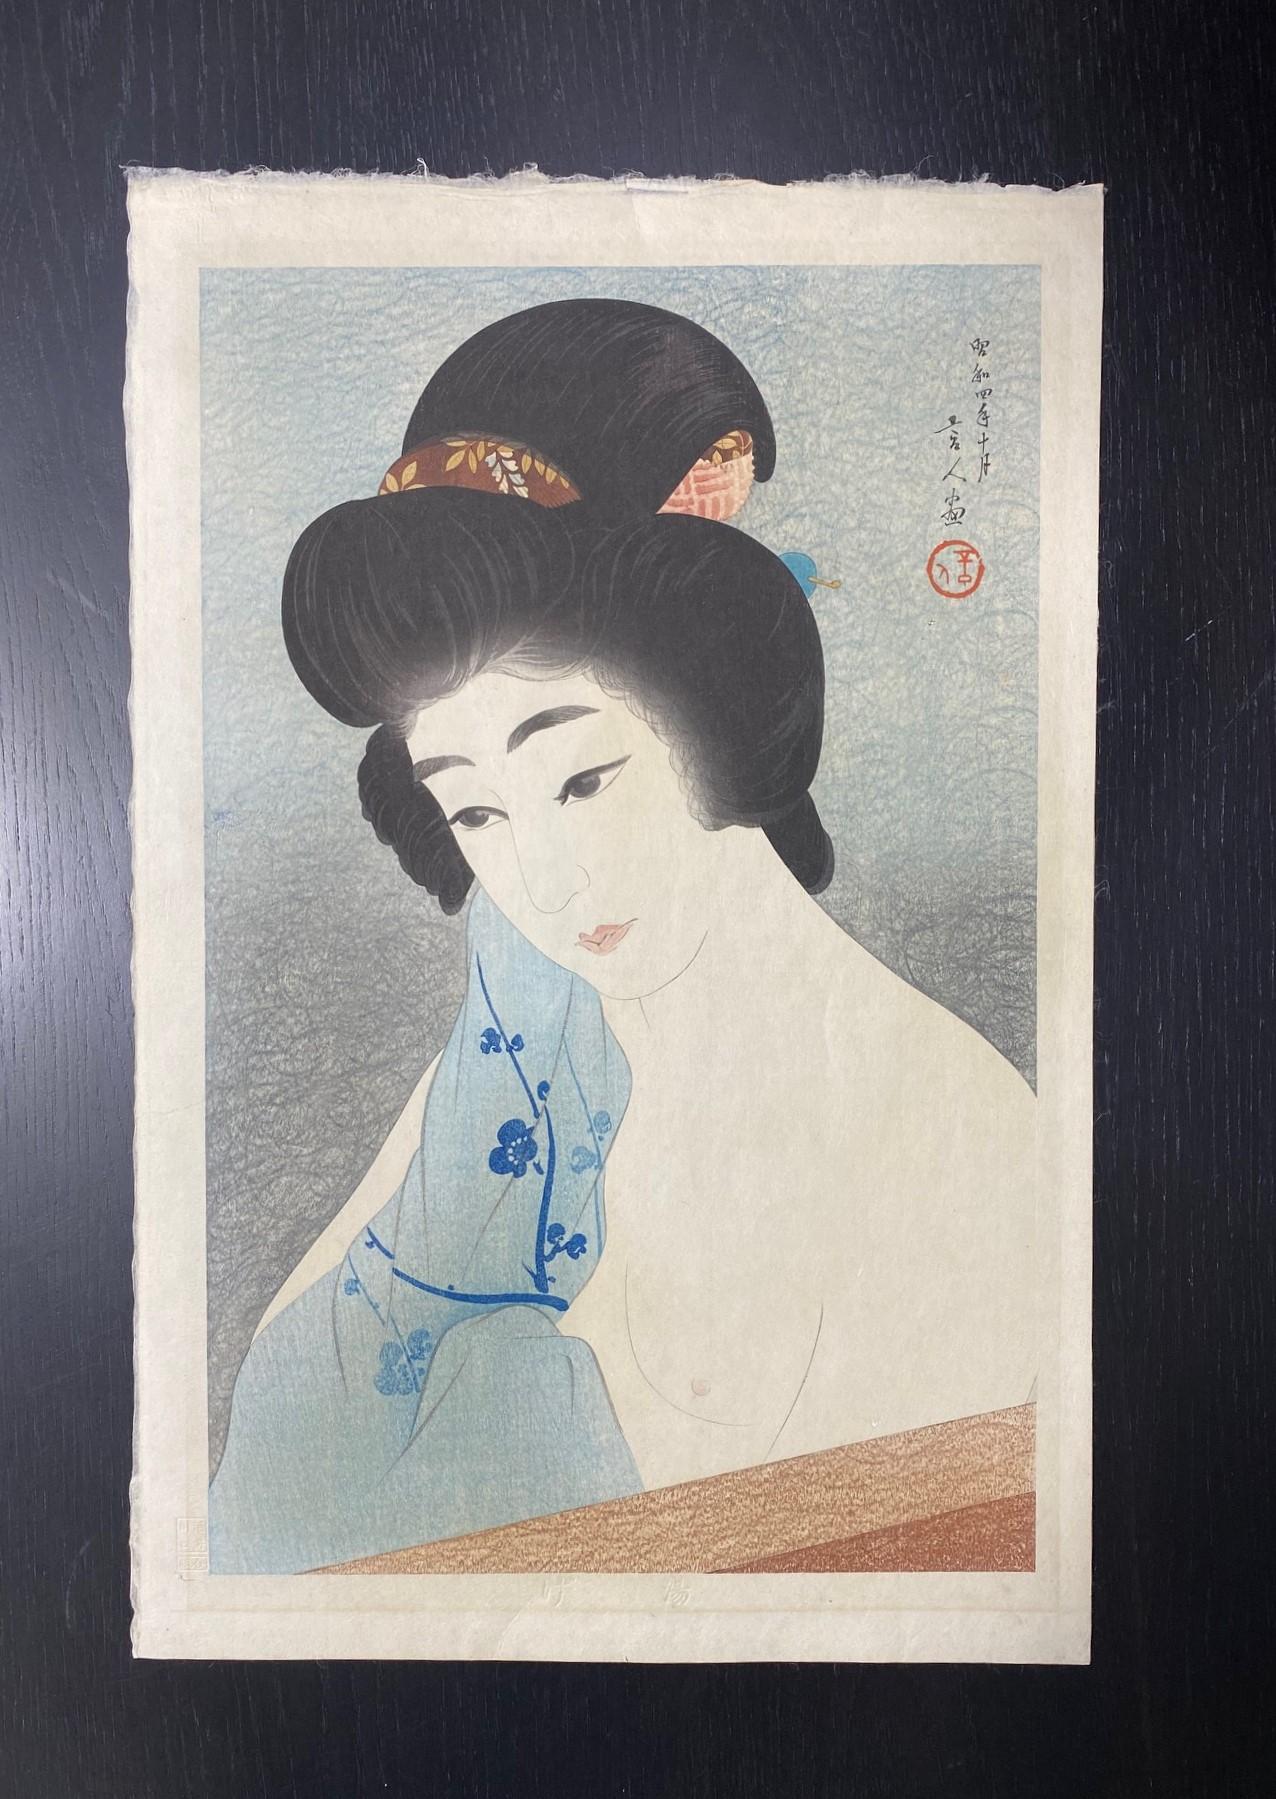 A beautiful and strongly composed woodblock print by renowned Japanese painter/artist Torii Kotondo. This work, titled Steam (Steam Bath)/ Vapor (Yuge), is a highly coveted pre-war printing done in 1929 (the title 